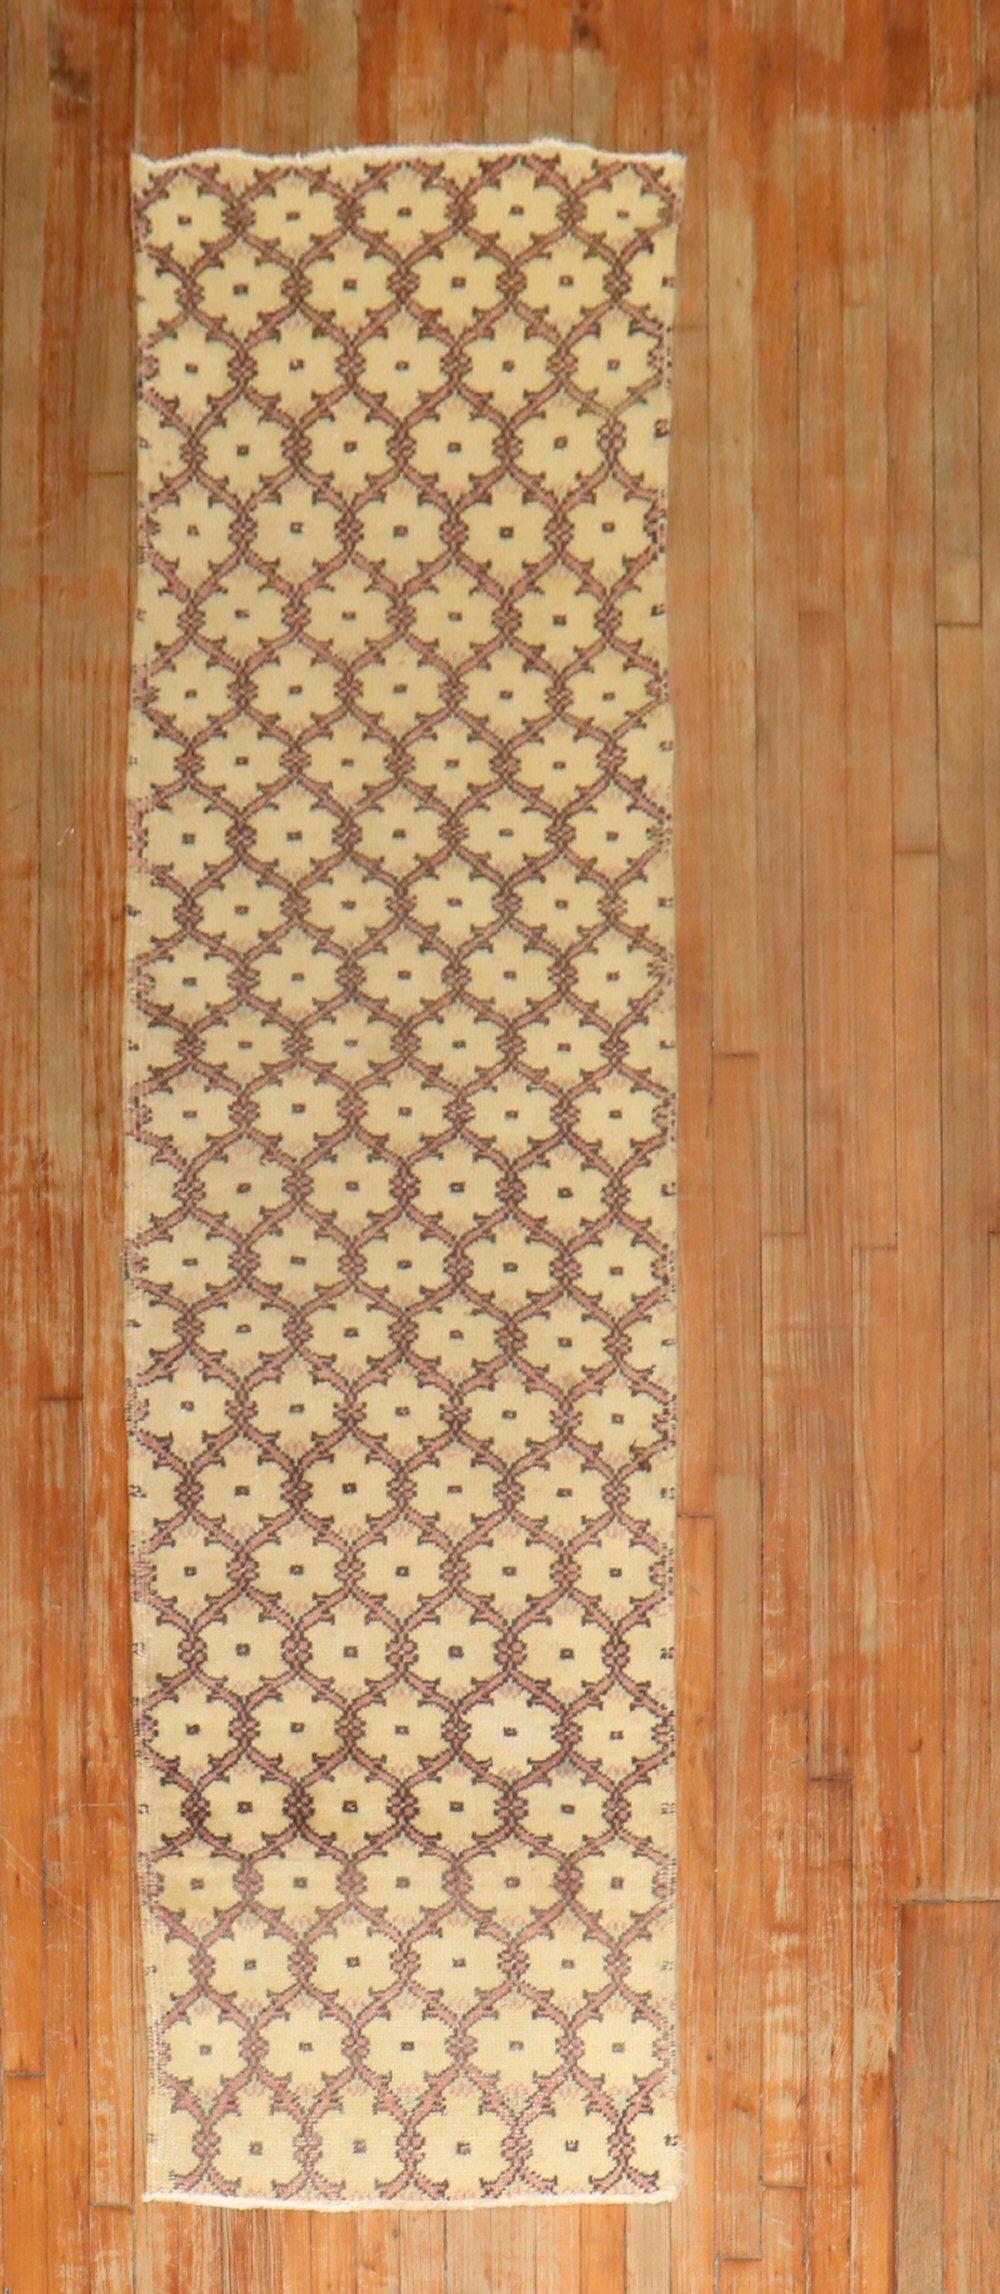 One of a kind decorative Vintage Turkish Konya runner with a repetitive borderless motif in soft pink on a creamy yellow field

Measures: 2'4'' x 9'3''.